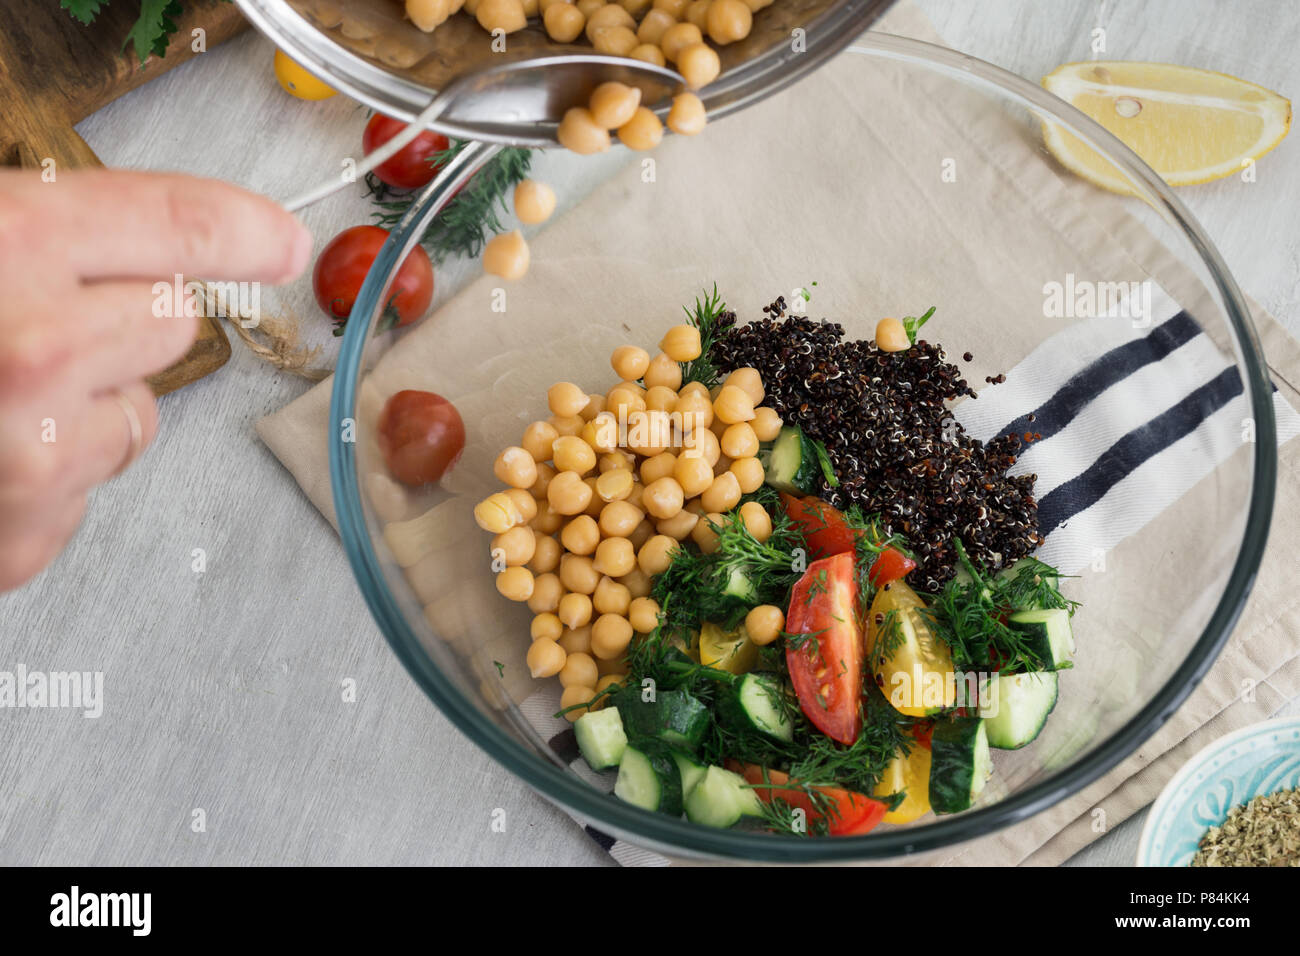 Cooking healthy food concept. Man preparing a salad of chickpeas, black quinoa and vegetables Stock Photo